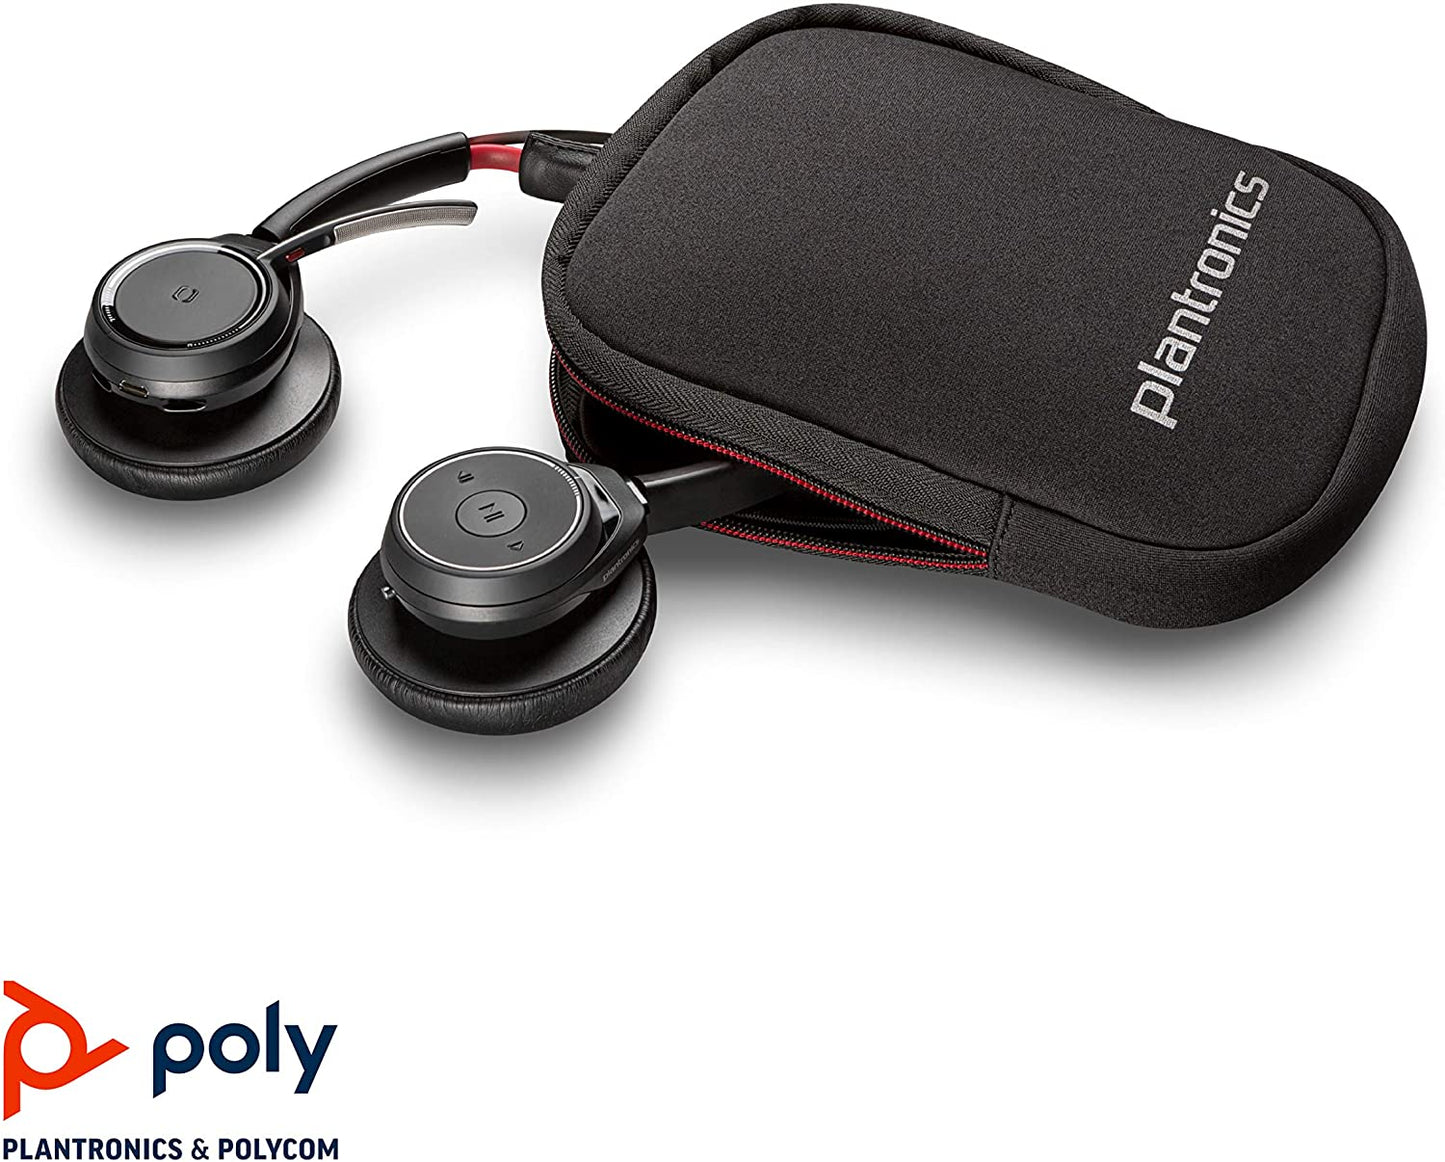 Plantronics Voyager Focus UC Stereo Bluetooth Headset